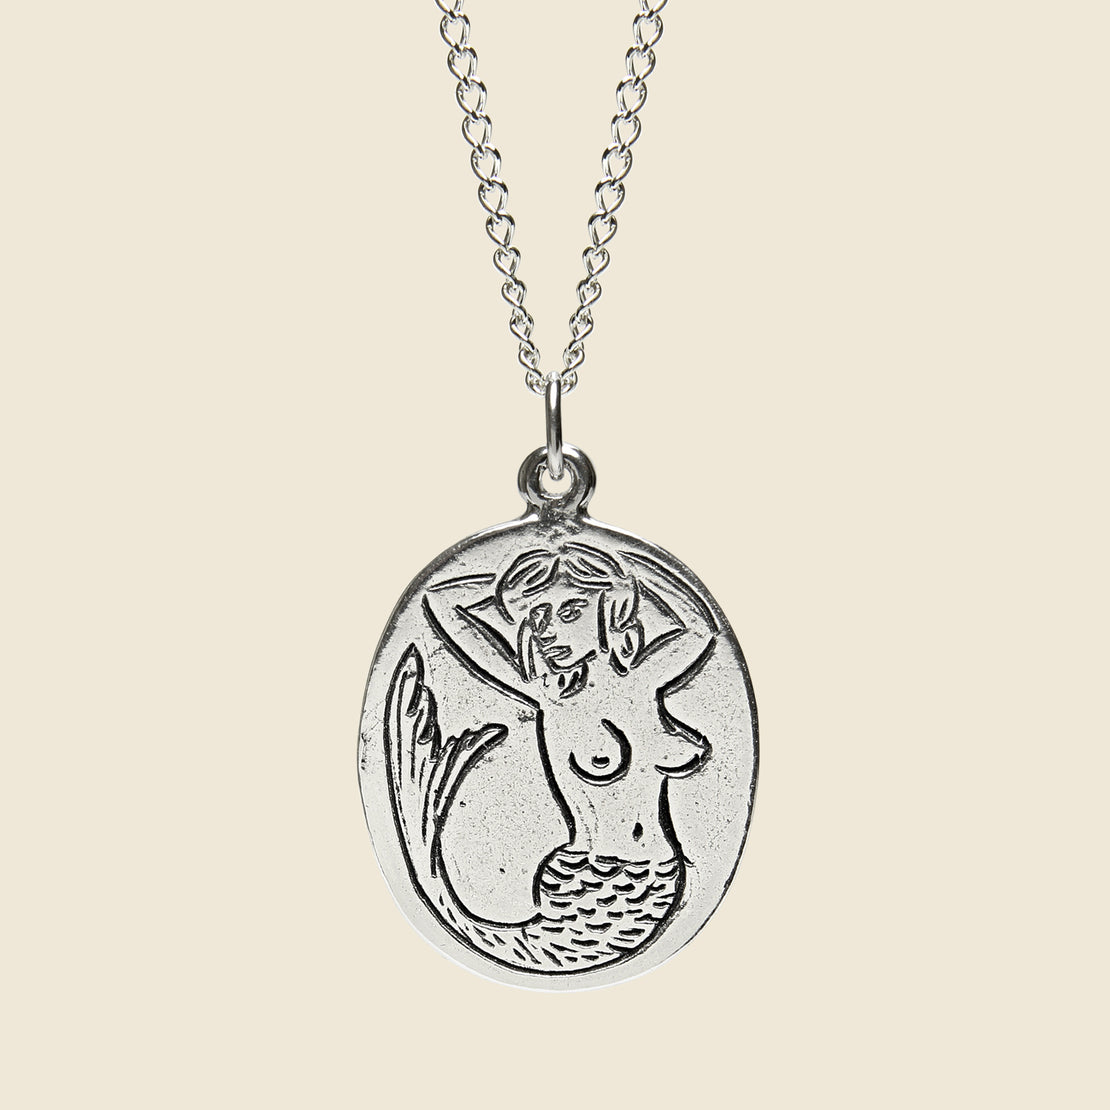 LHN Jewelry Mermaid Necklace - Sterling Silver